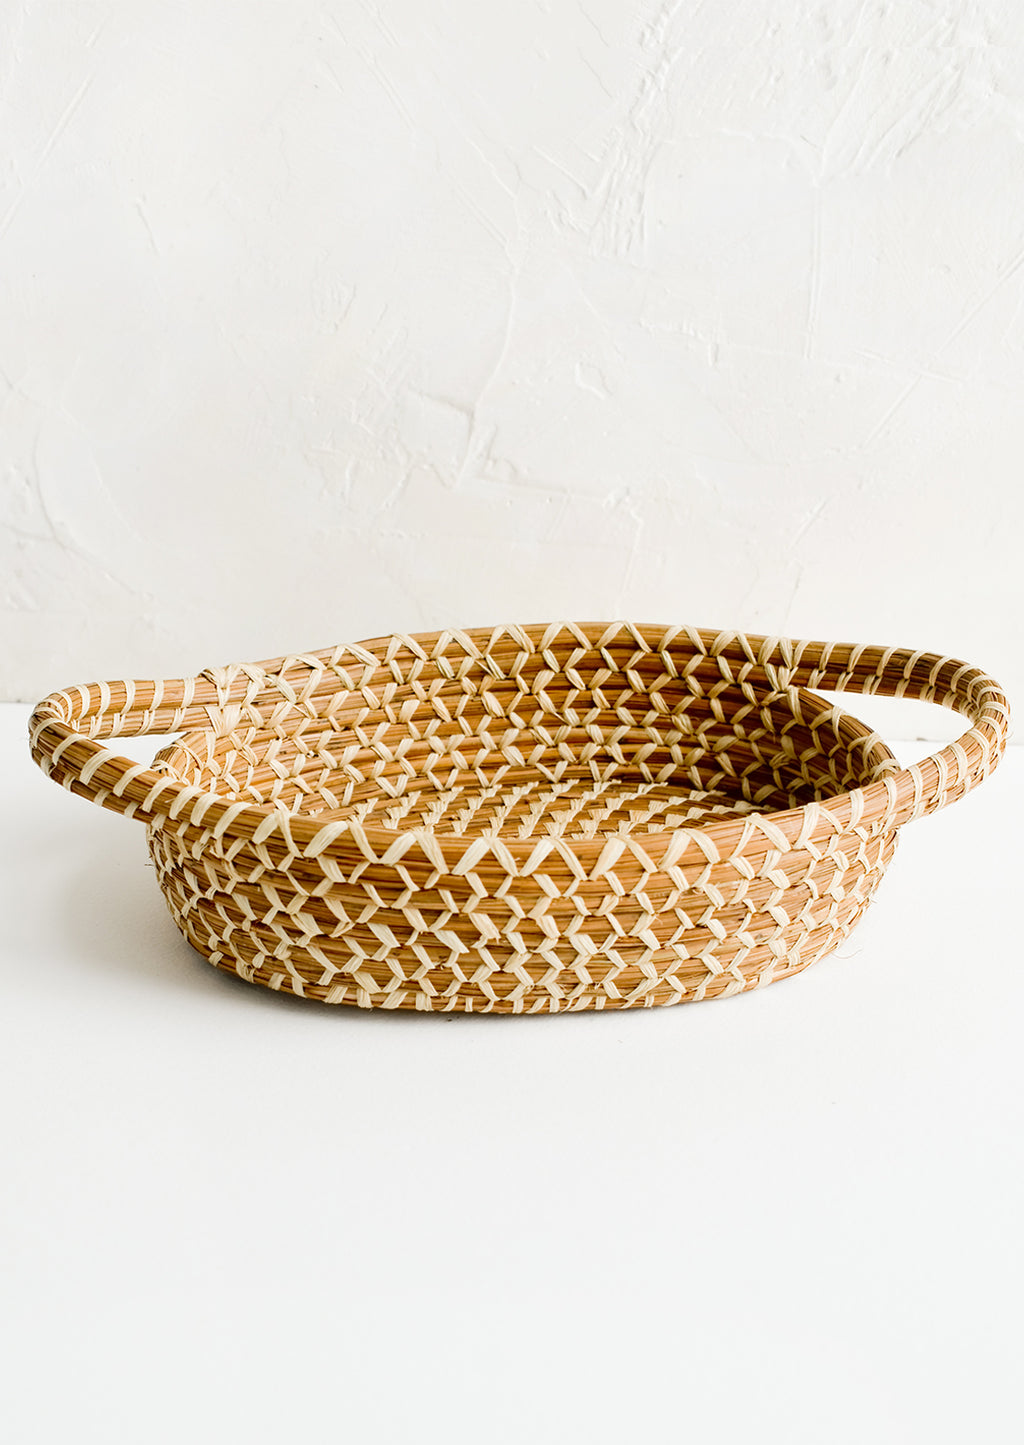 2: A shallow, oval shaped basket with handles at sides.